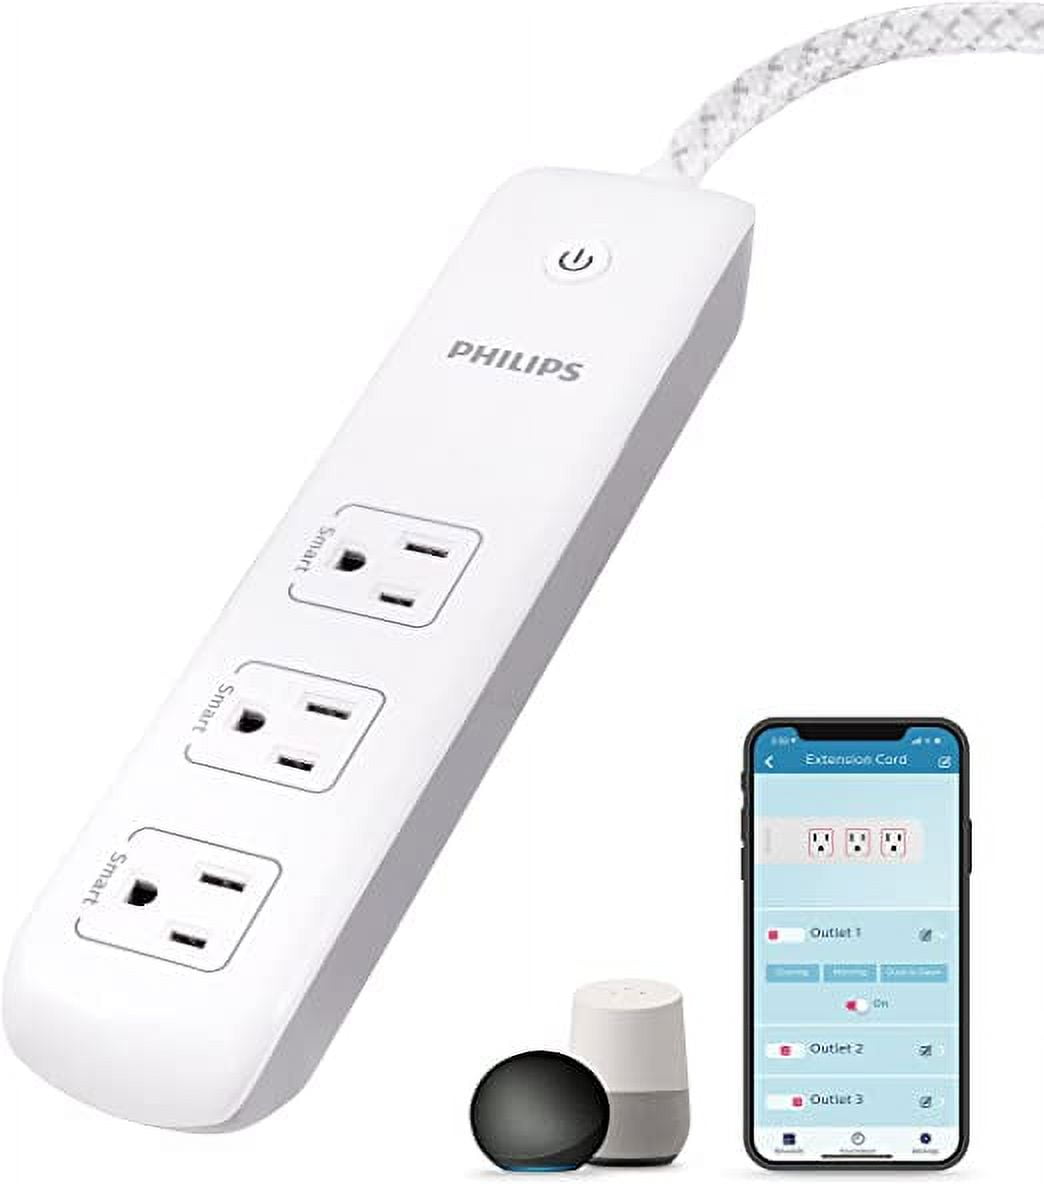 Philips 4' Smart Plug 3-Outlet Extension Cord - White 